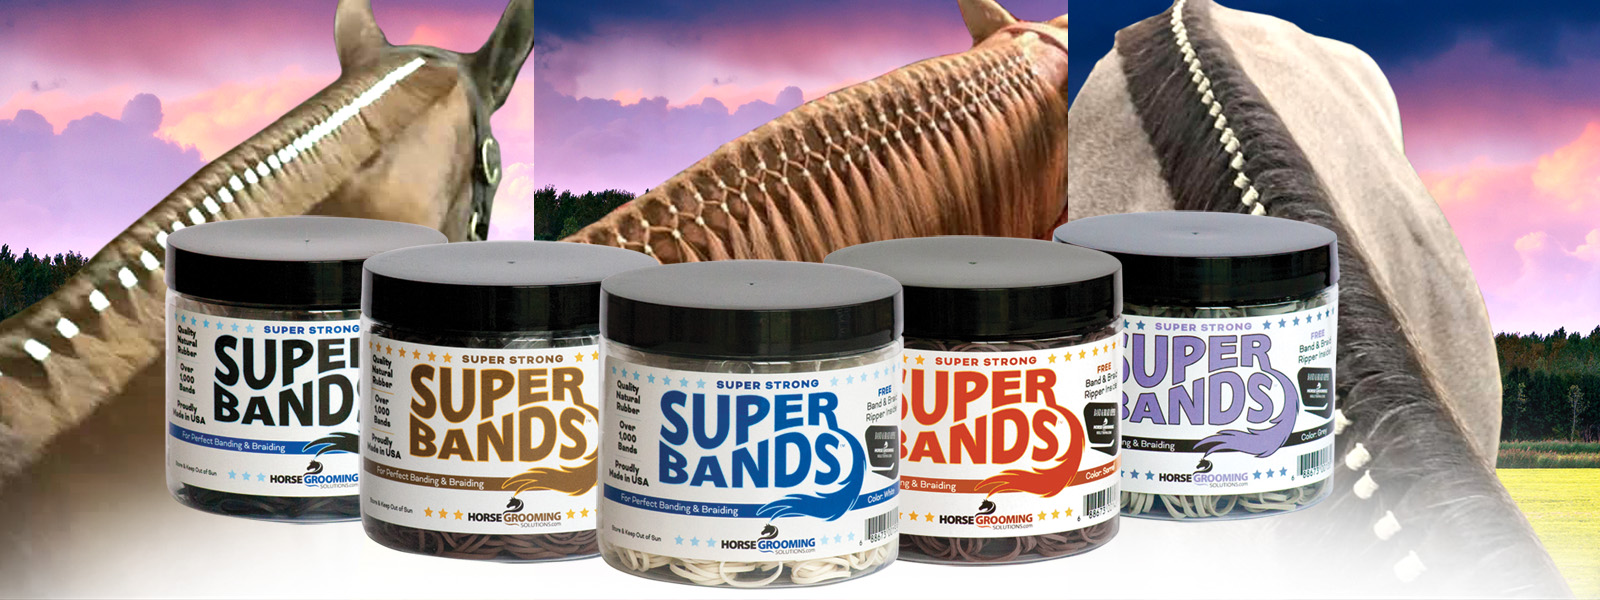 Horse Hair Rubber Bands for Braiding & Banding SuperBands, Natural Bands by Healthy HairCare